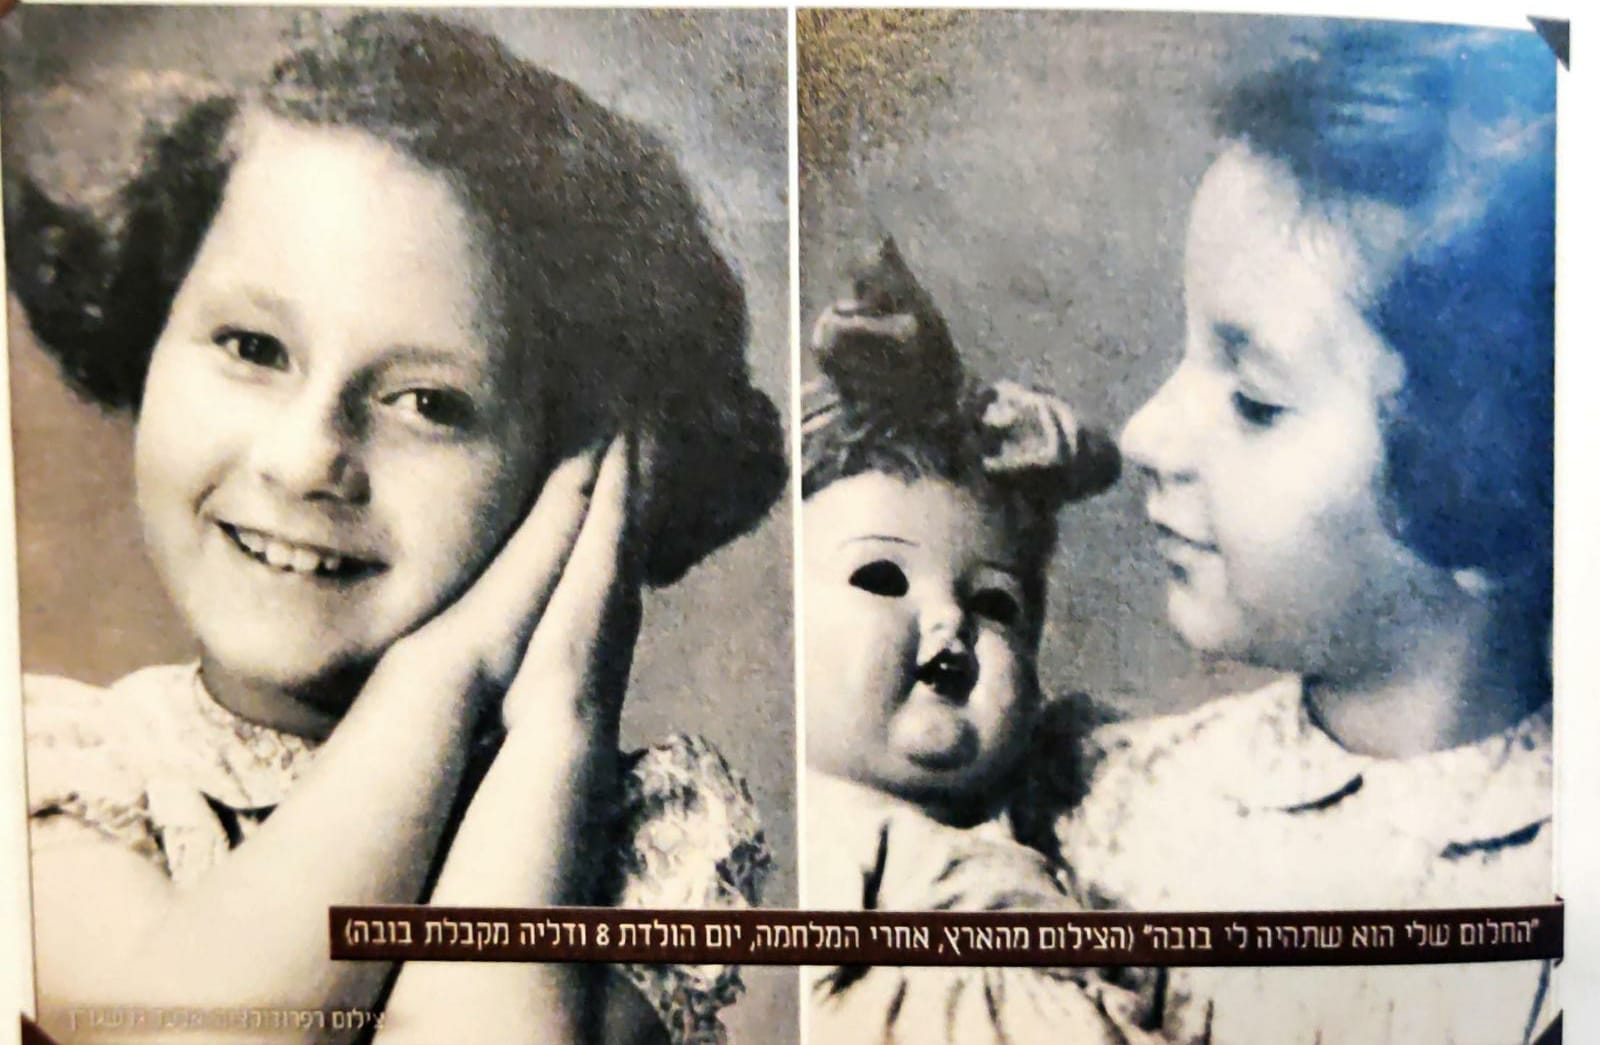 Dalia on her eighth birthday, receiving a doll as a present.  This picture was taken in Eretz Israel about five months after the end of the war.